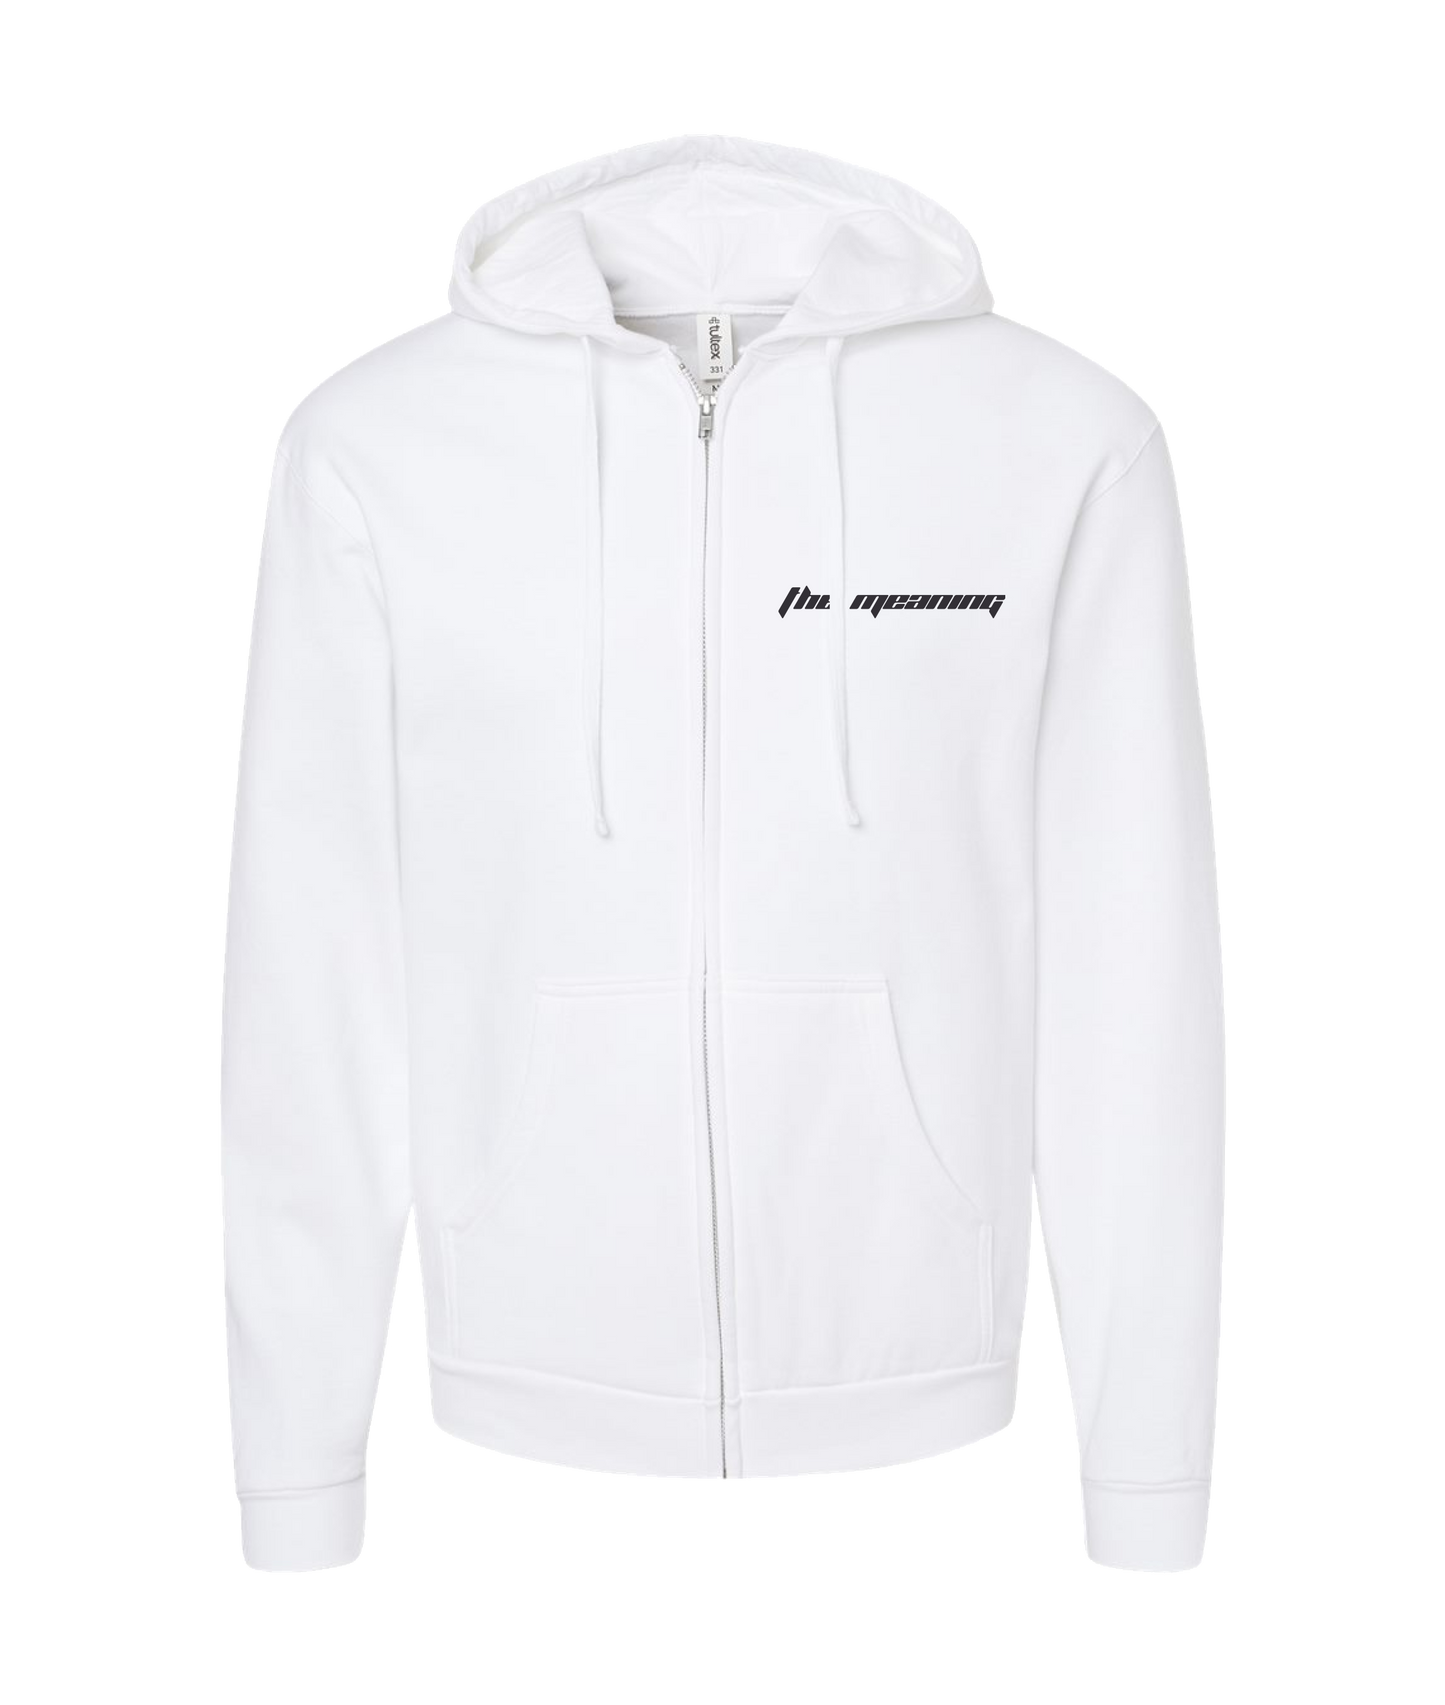 Explit - THE MEANING - White Zip Up Hoodie